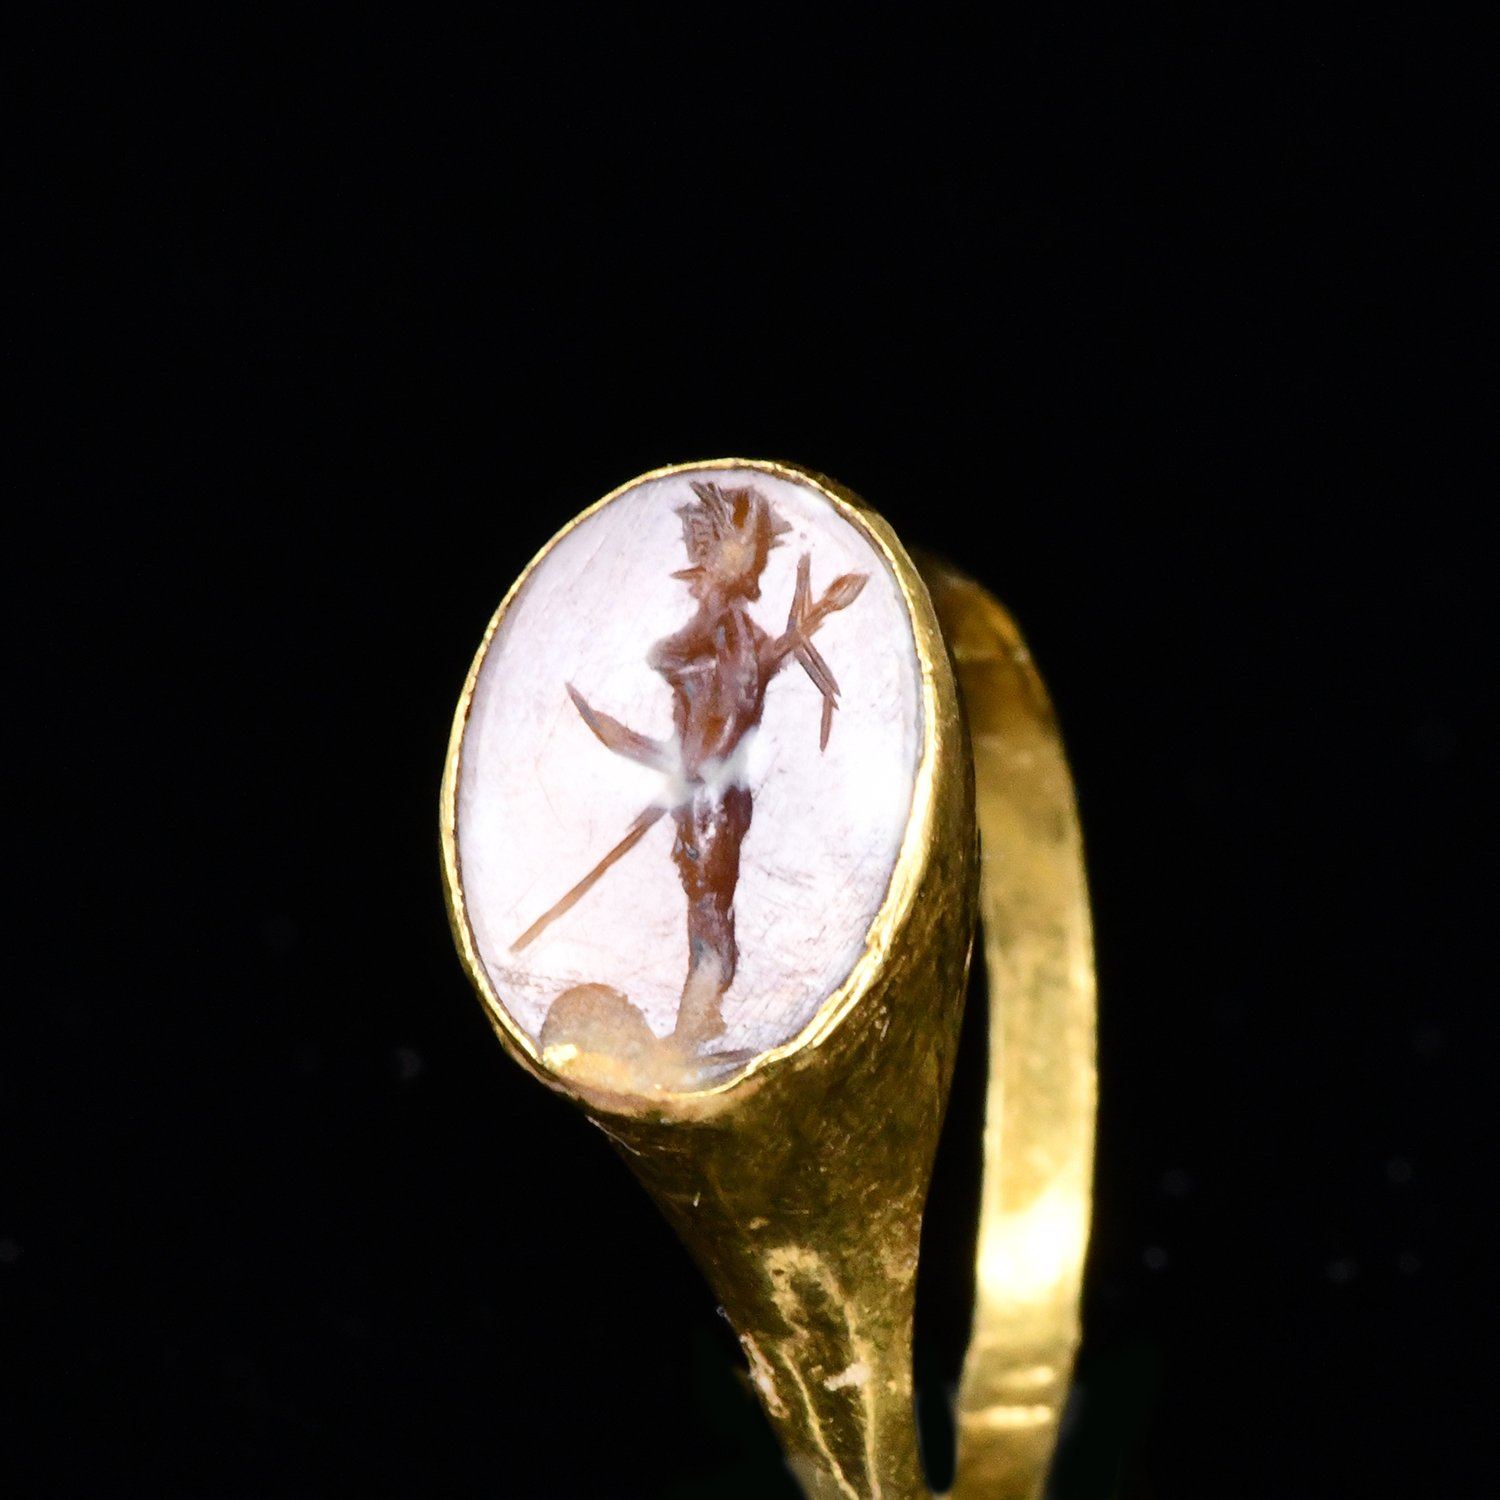 A Roman Gold and Agate Finger Ring, ca. 2nd century CE